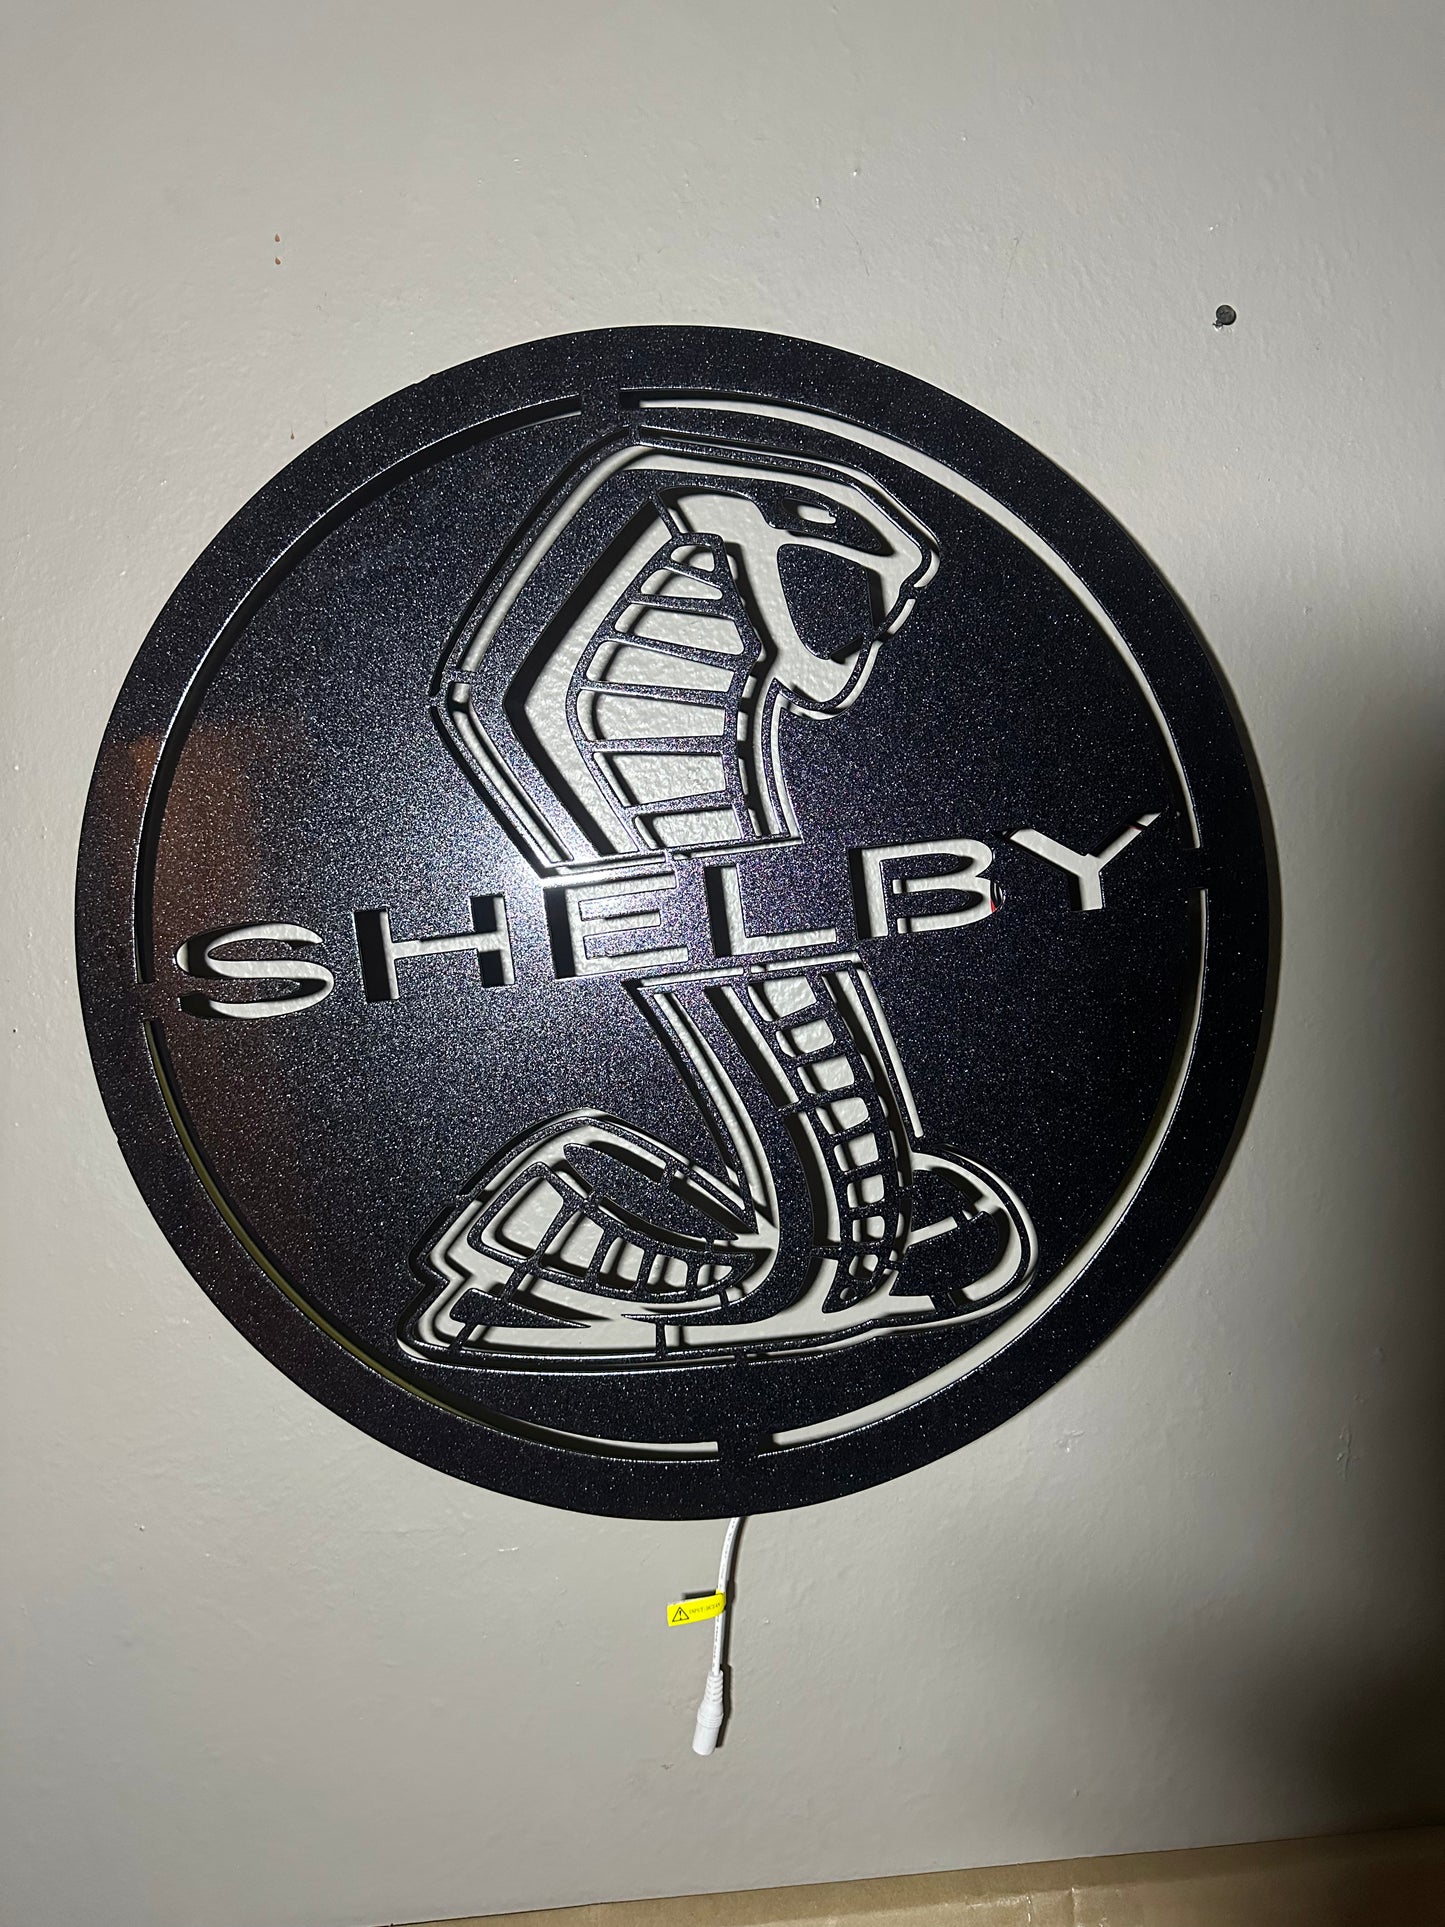 20x20 shelby sign with optional led 6500w white backlit BLACK METALLIC